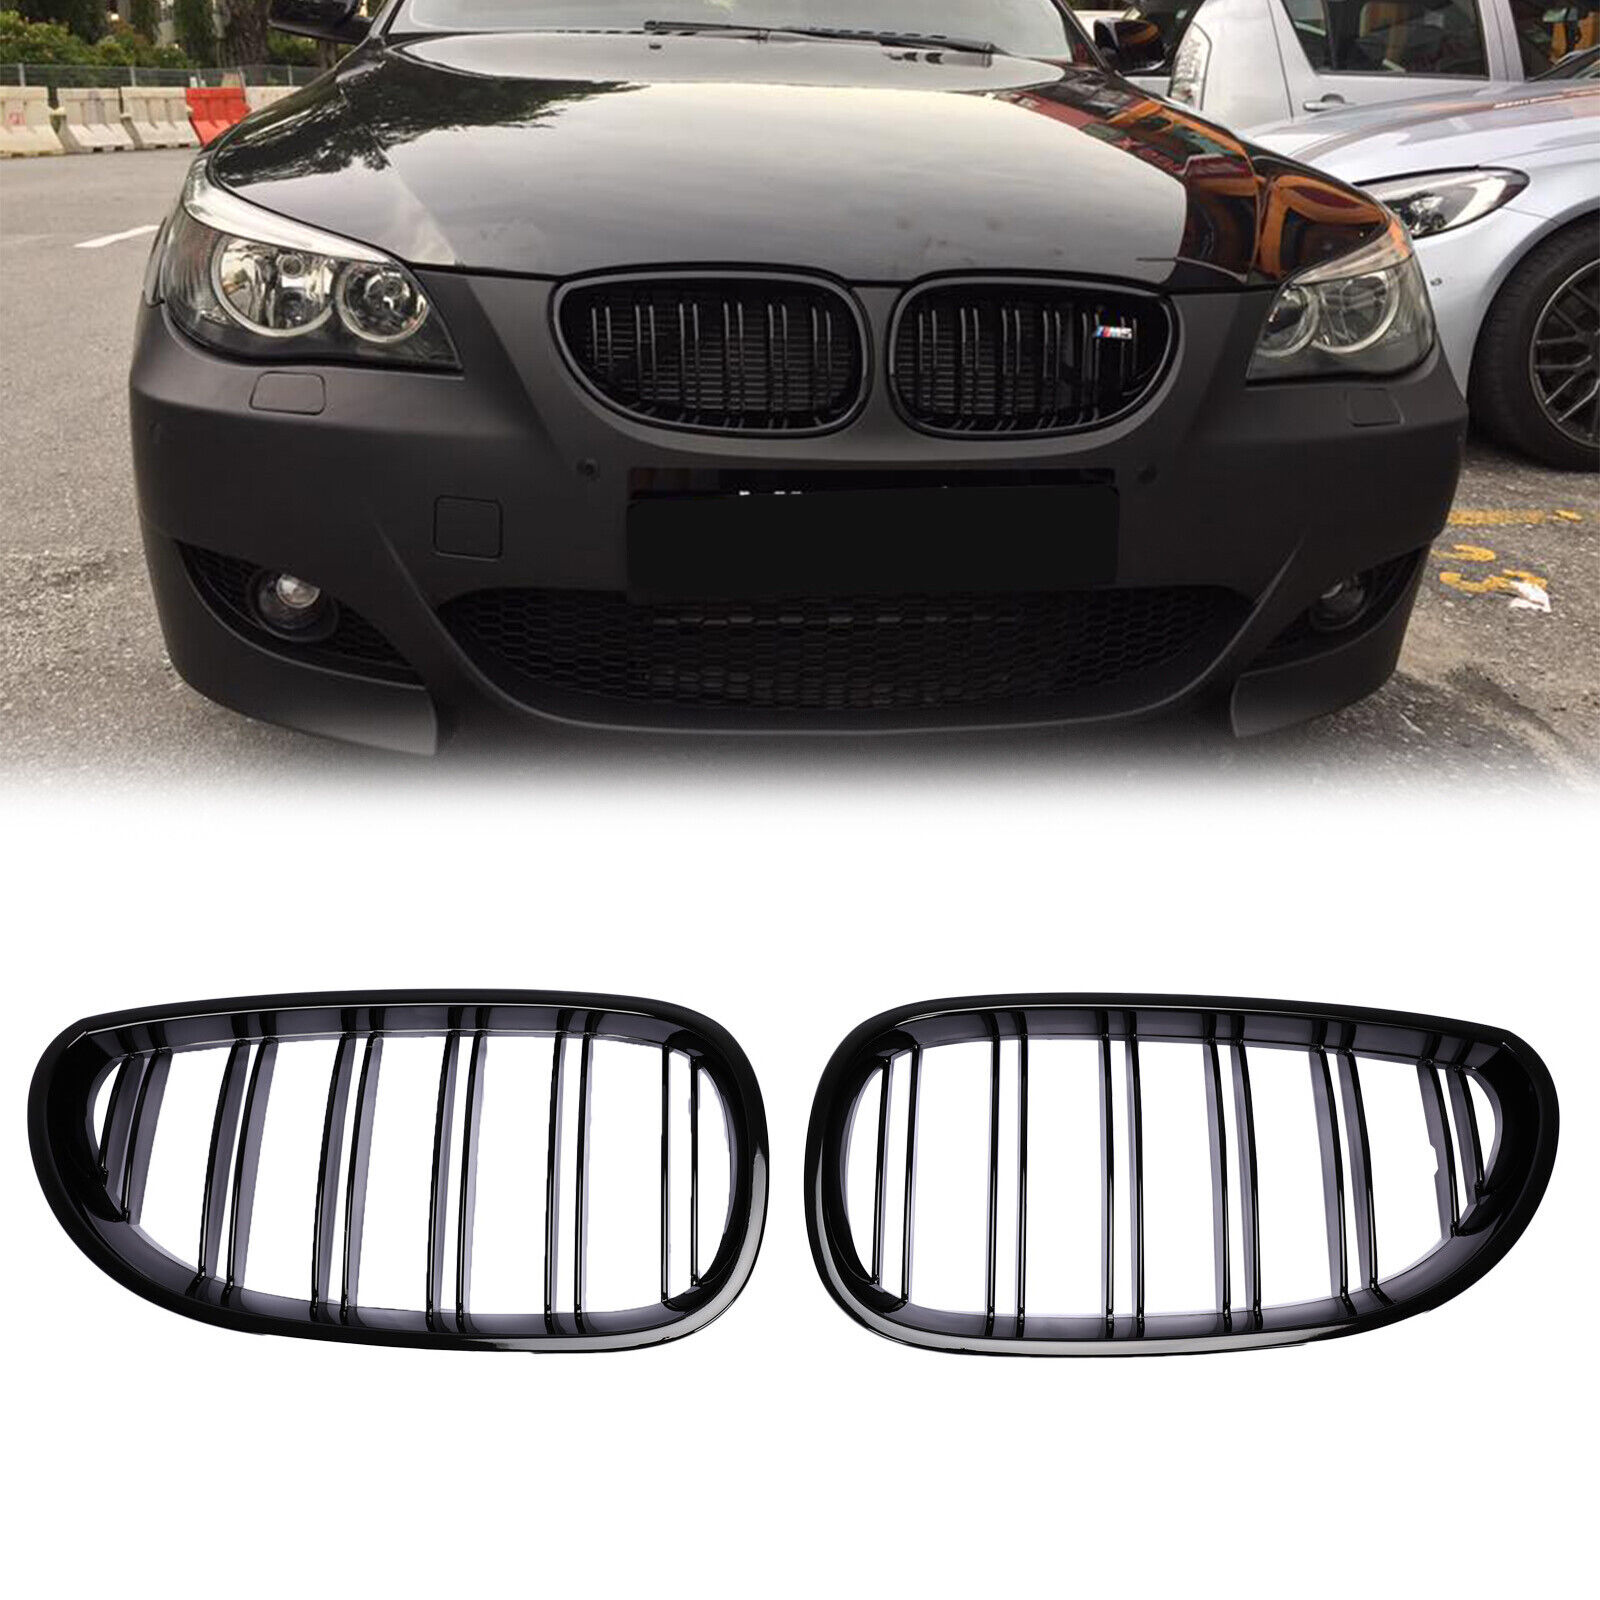 Pair Gloss Black Front Kidney Grille Grill For BMW E60 E61 5 Series 2003-2010